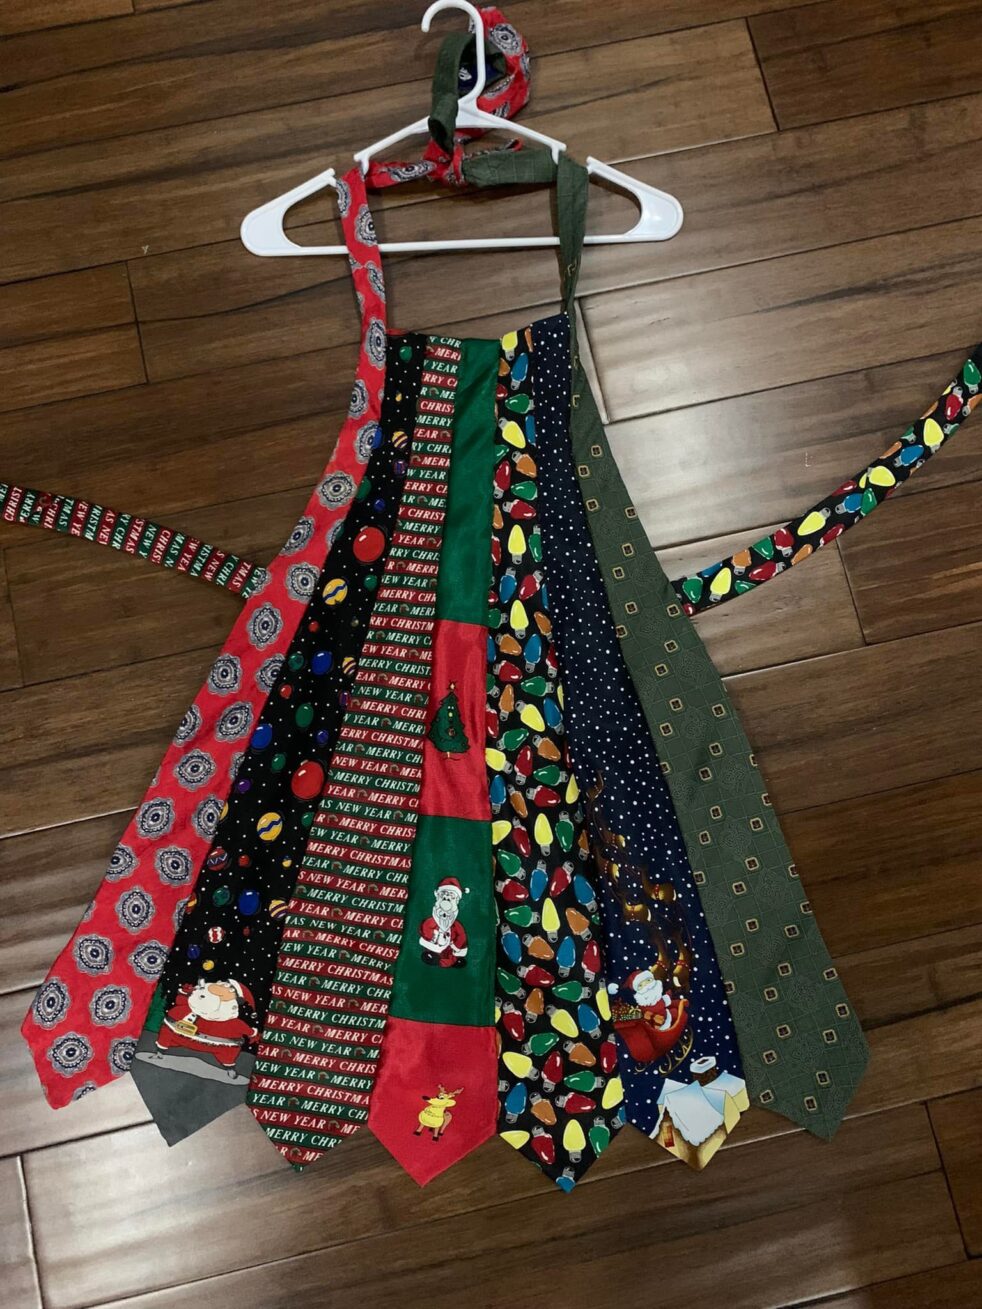 Necktie Apron - Here is an idea of using old neckties to make an apron out of it. #Apron #Necktie #Neckties #NecktieApron